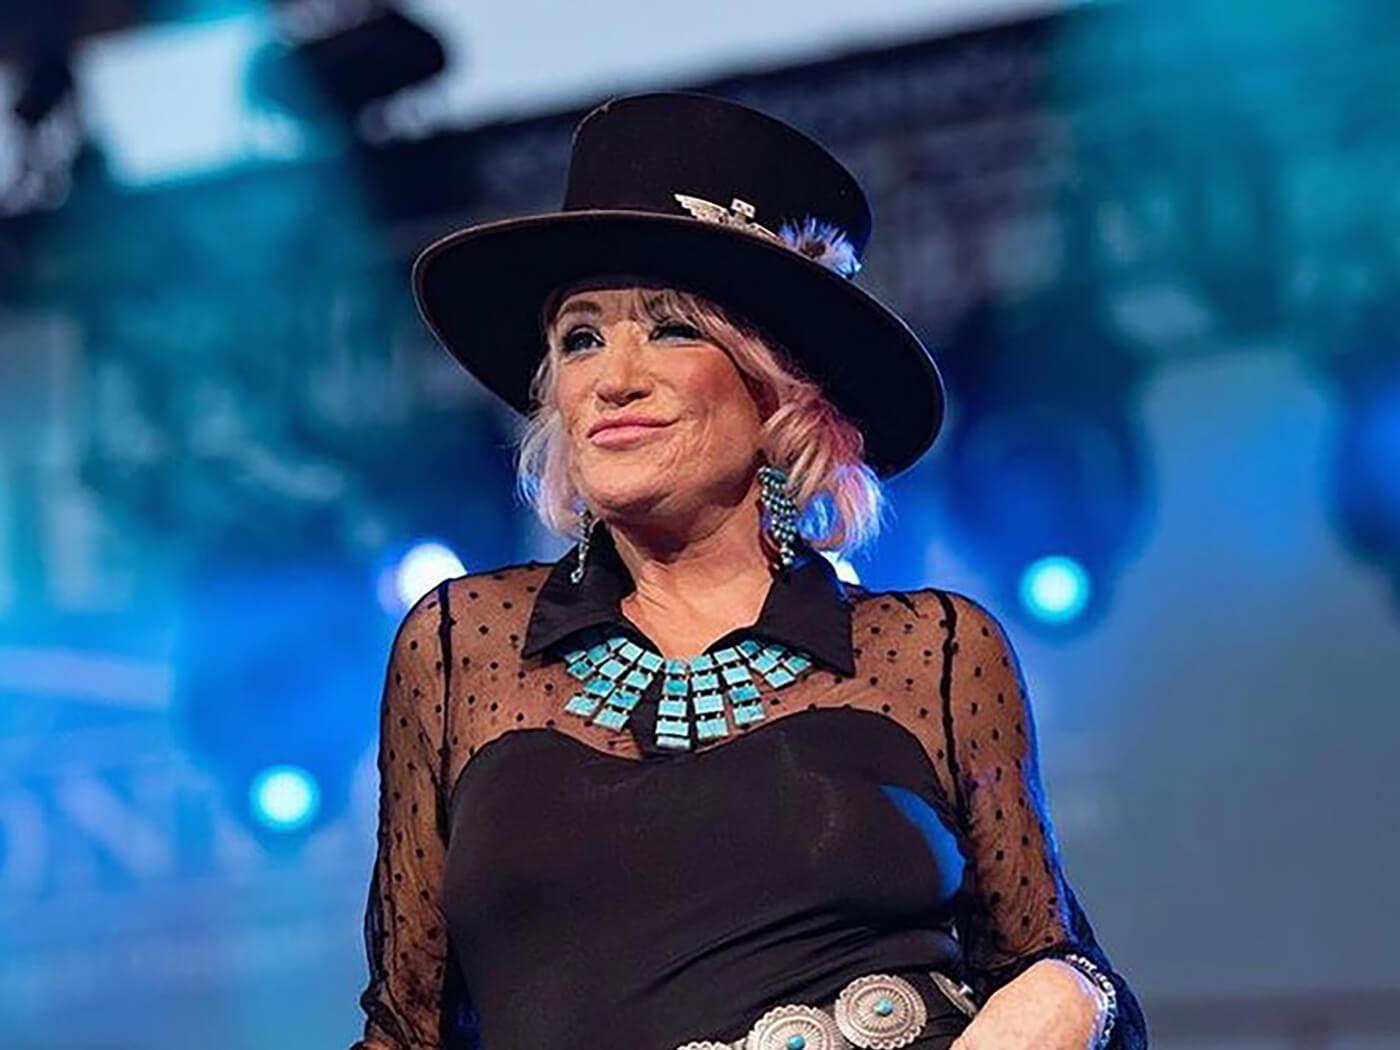 Tanya Tucker faces mortality on “Bring My Flowers Now”